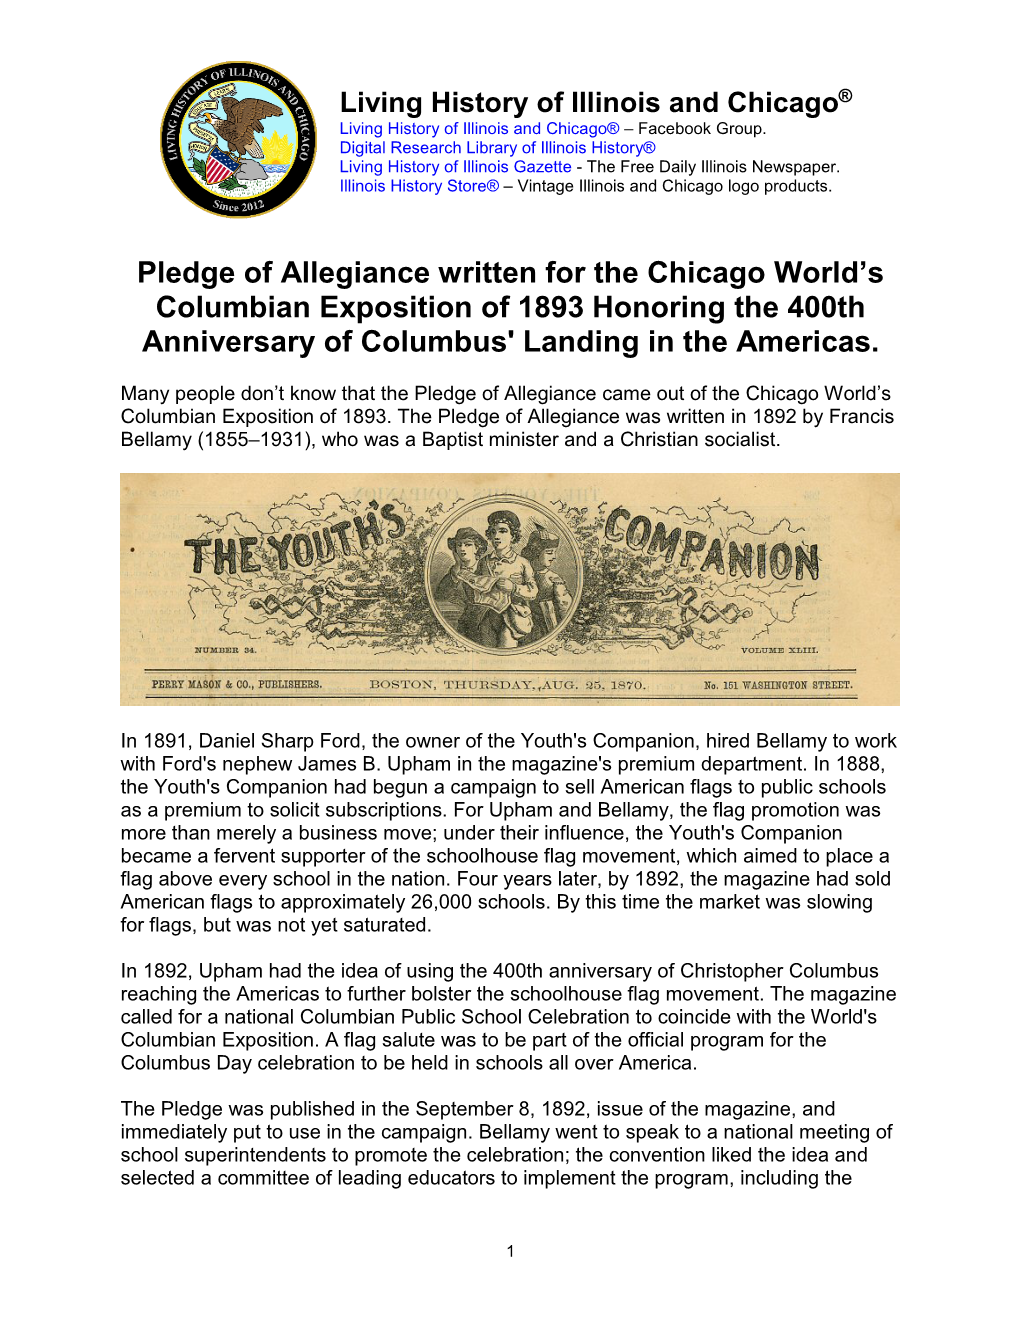 Pledge of Allegiance Written for the Chicago World’S Columbian Exposition of 1893 Honoring the 400Th Anniversary of Columbus' Landing in the Americas